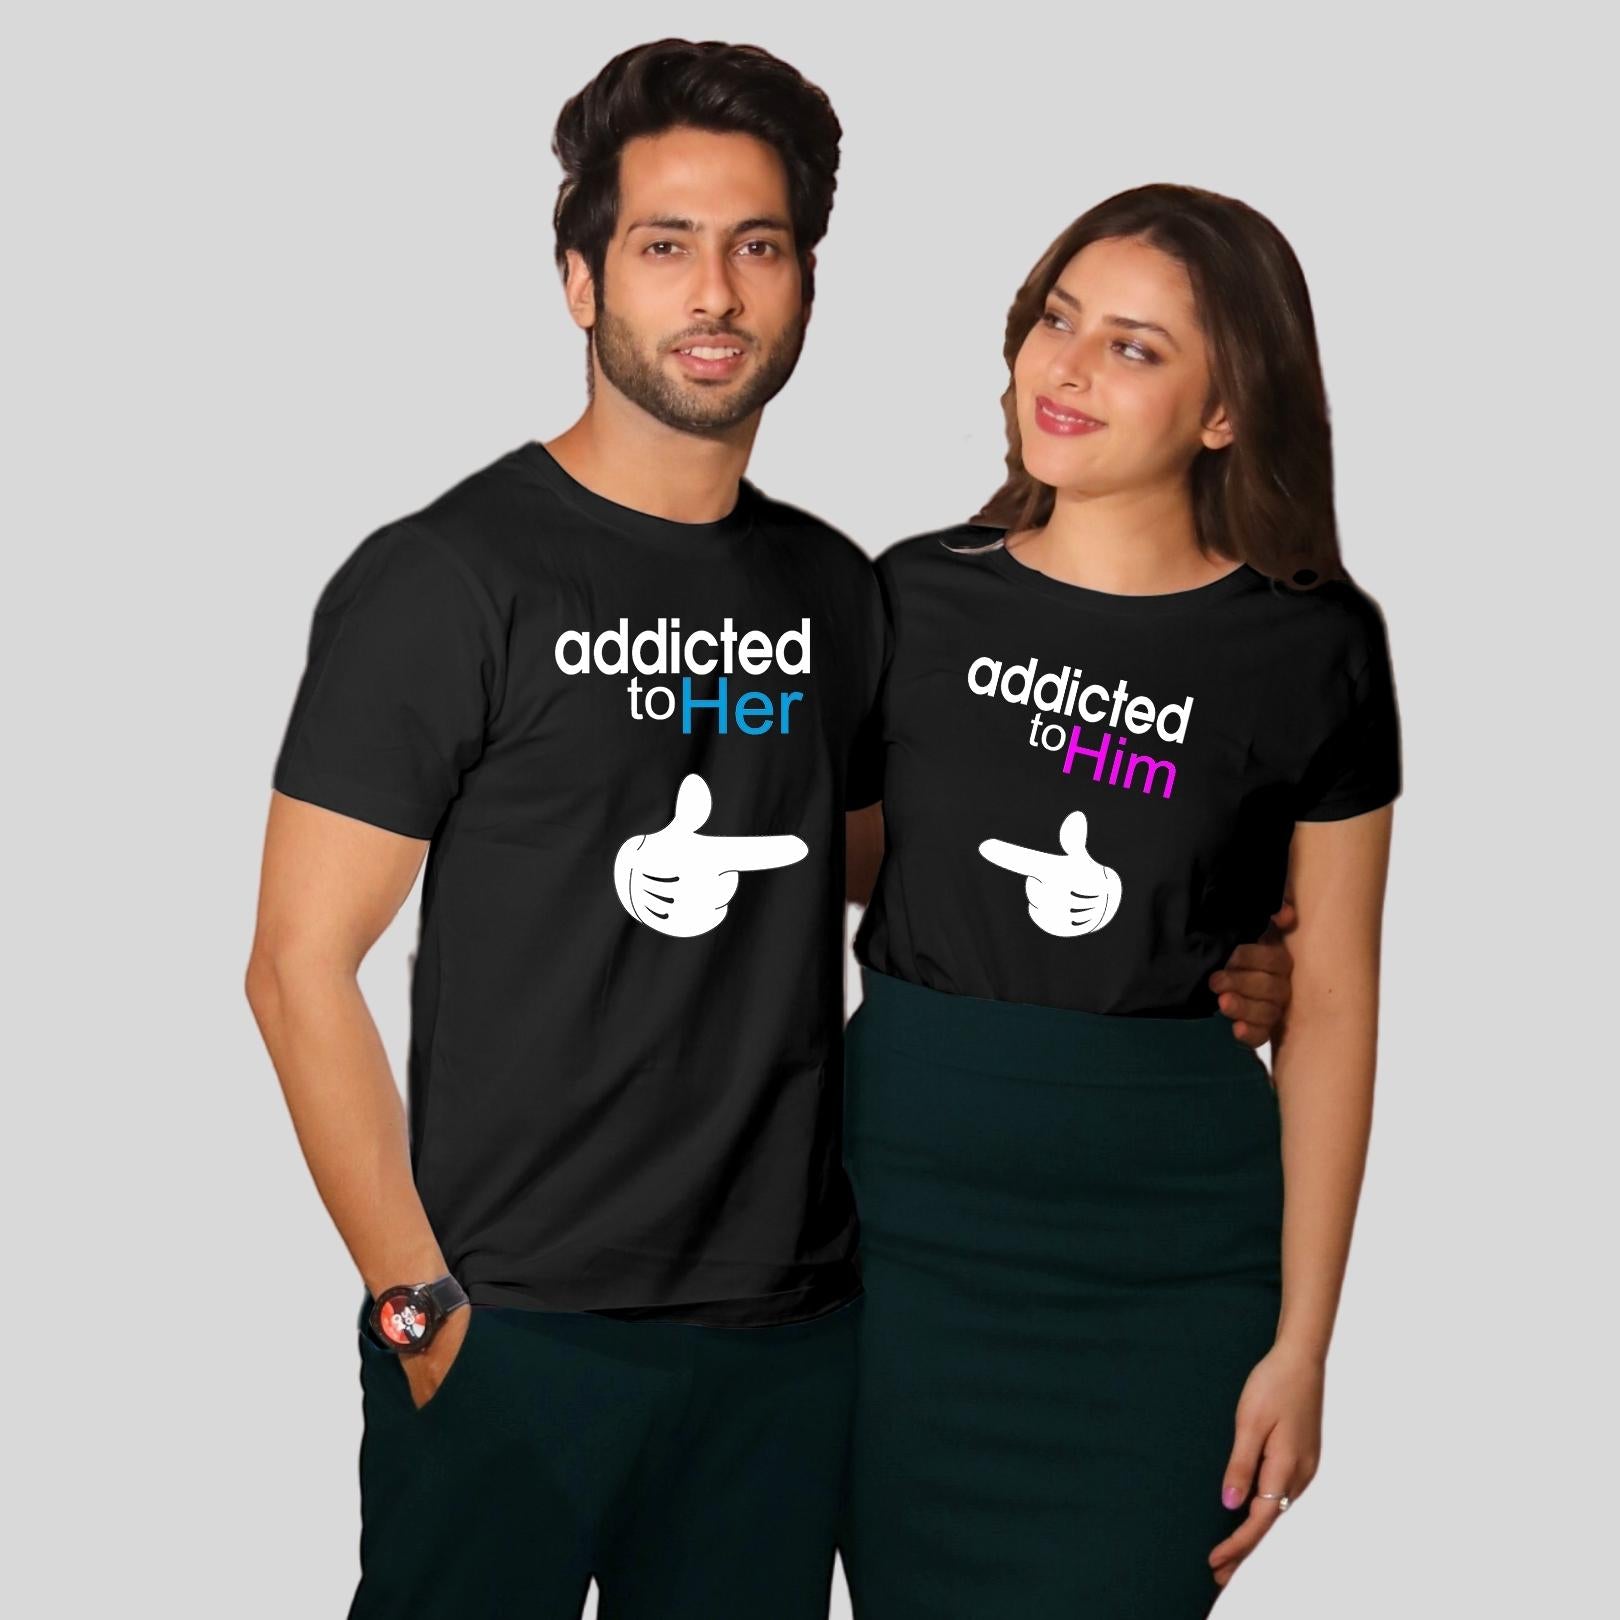 Couple T Shirt In Black Colour - Addicted To Her Addicted To Him Variant